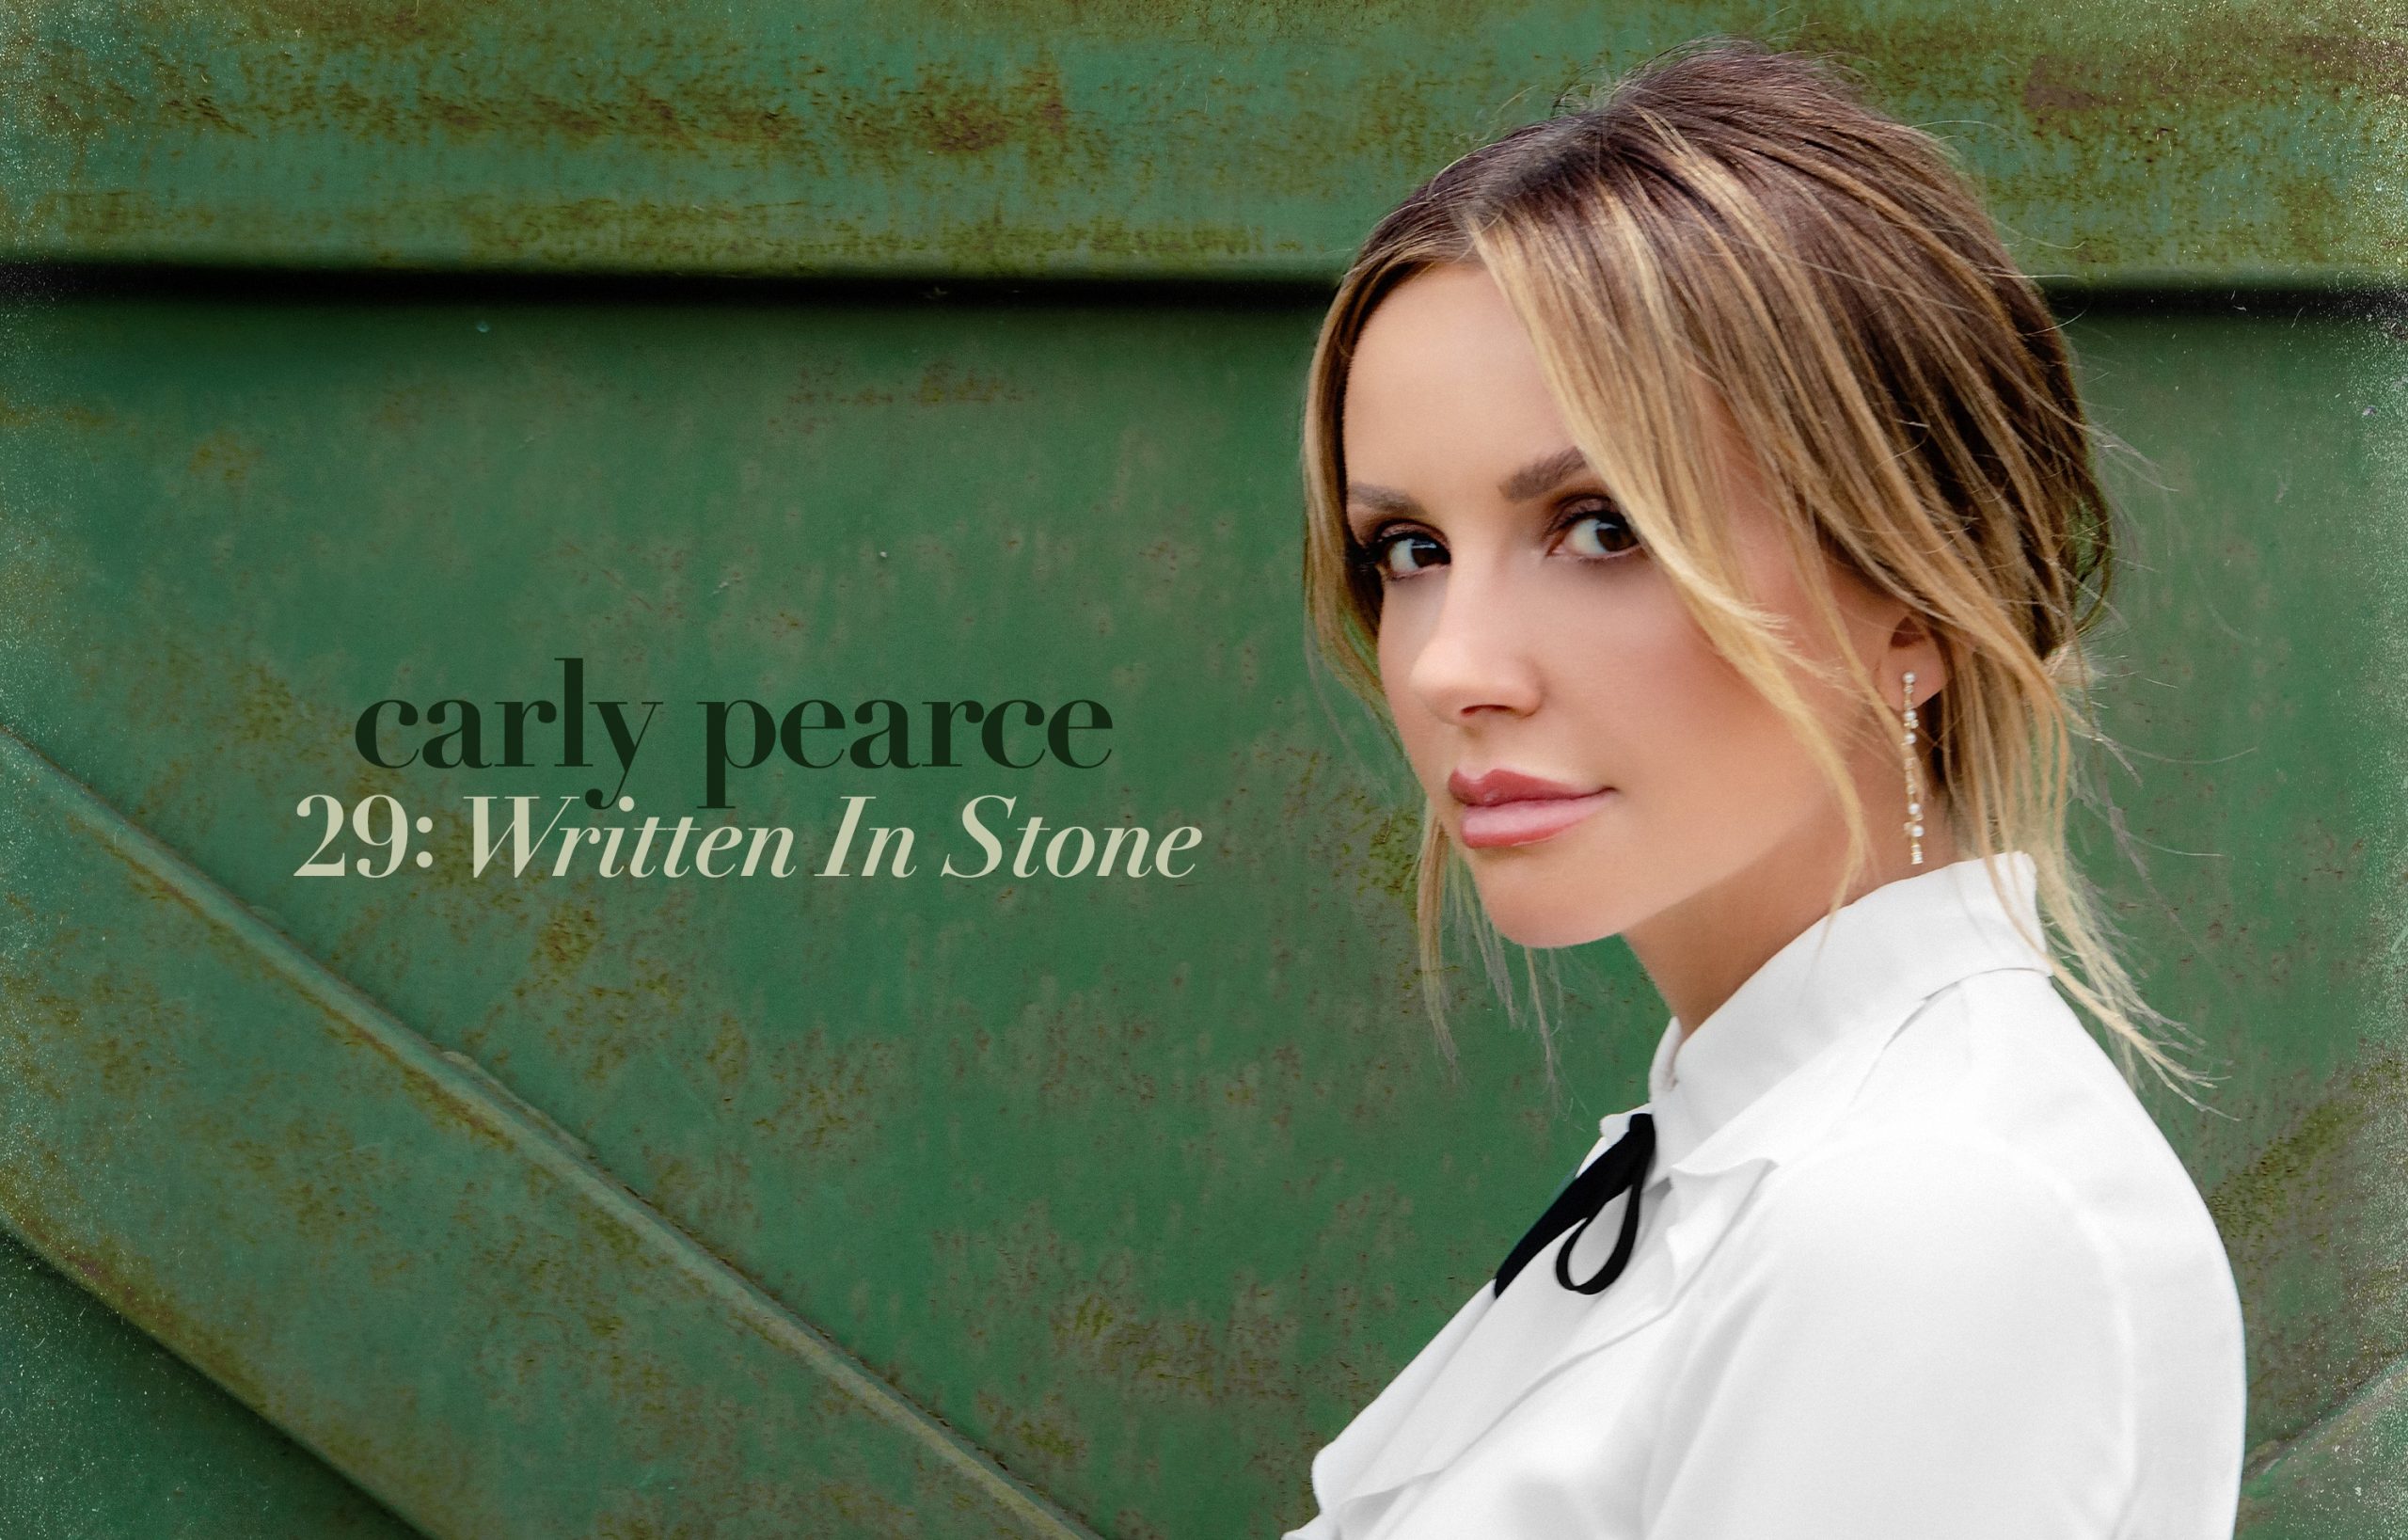 Turning Stone set to host special performance by Grammy winning artist Carly Pearce